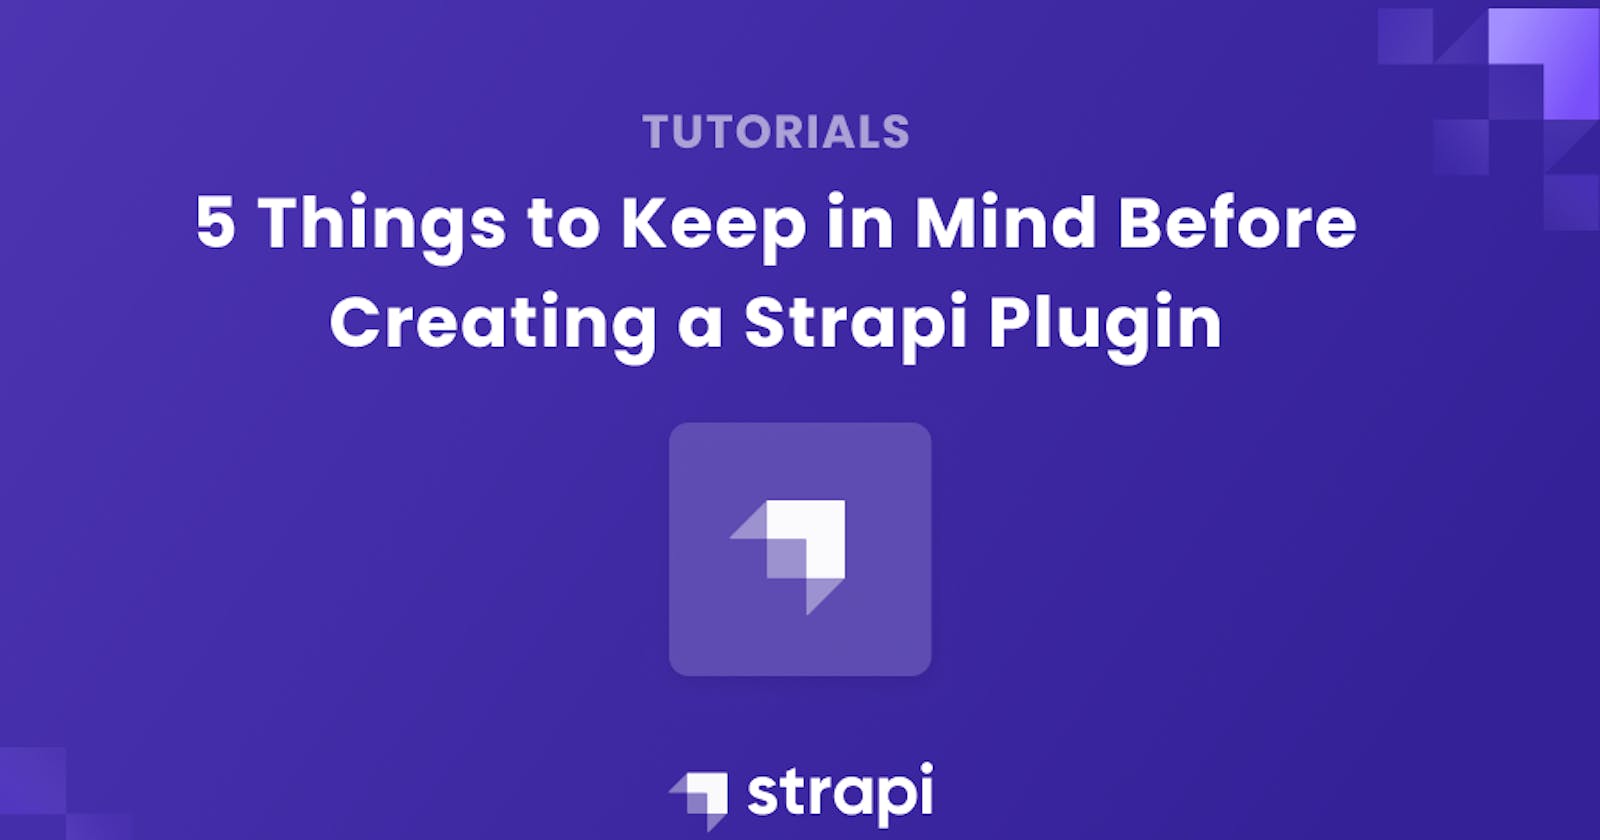 5 Things to Keep in Mind Before Creating a Strapi Plugin